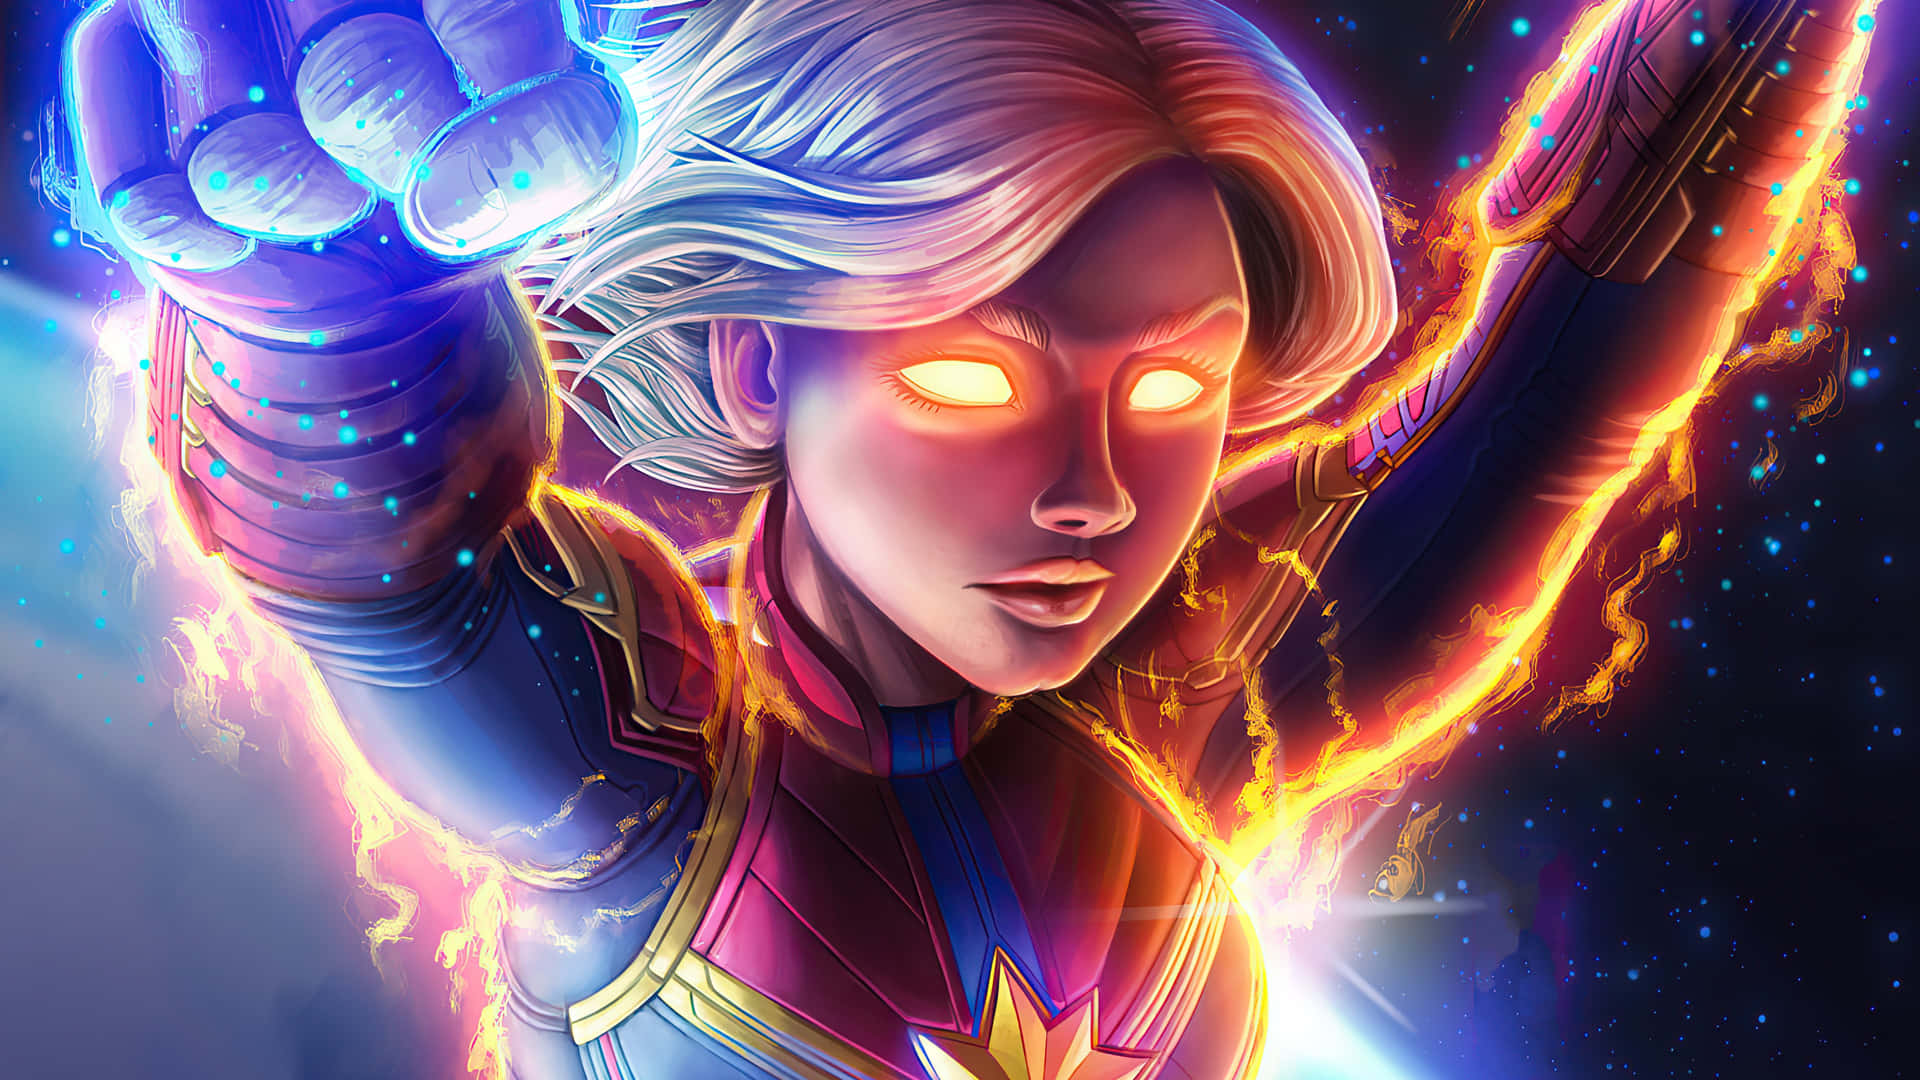 "Stay connected and powerful with the new Captain Marvel Ipad" Wallpaper